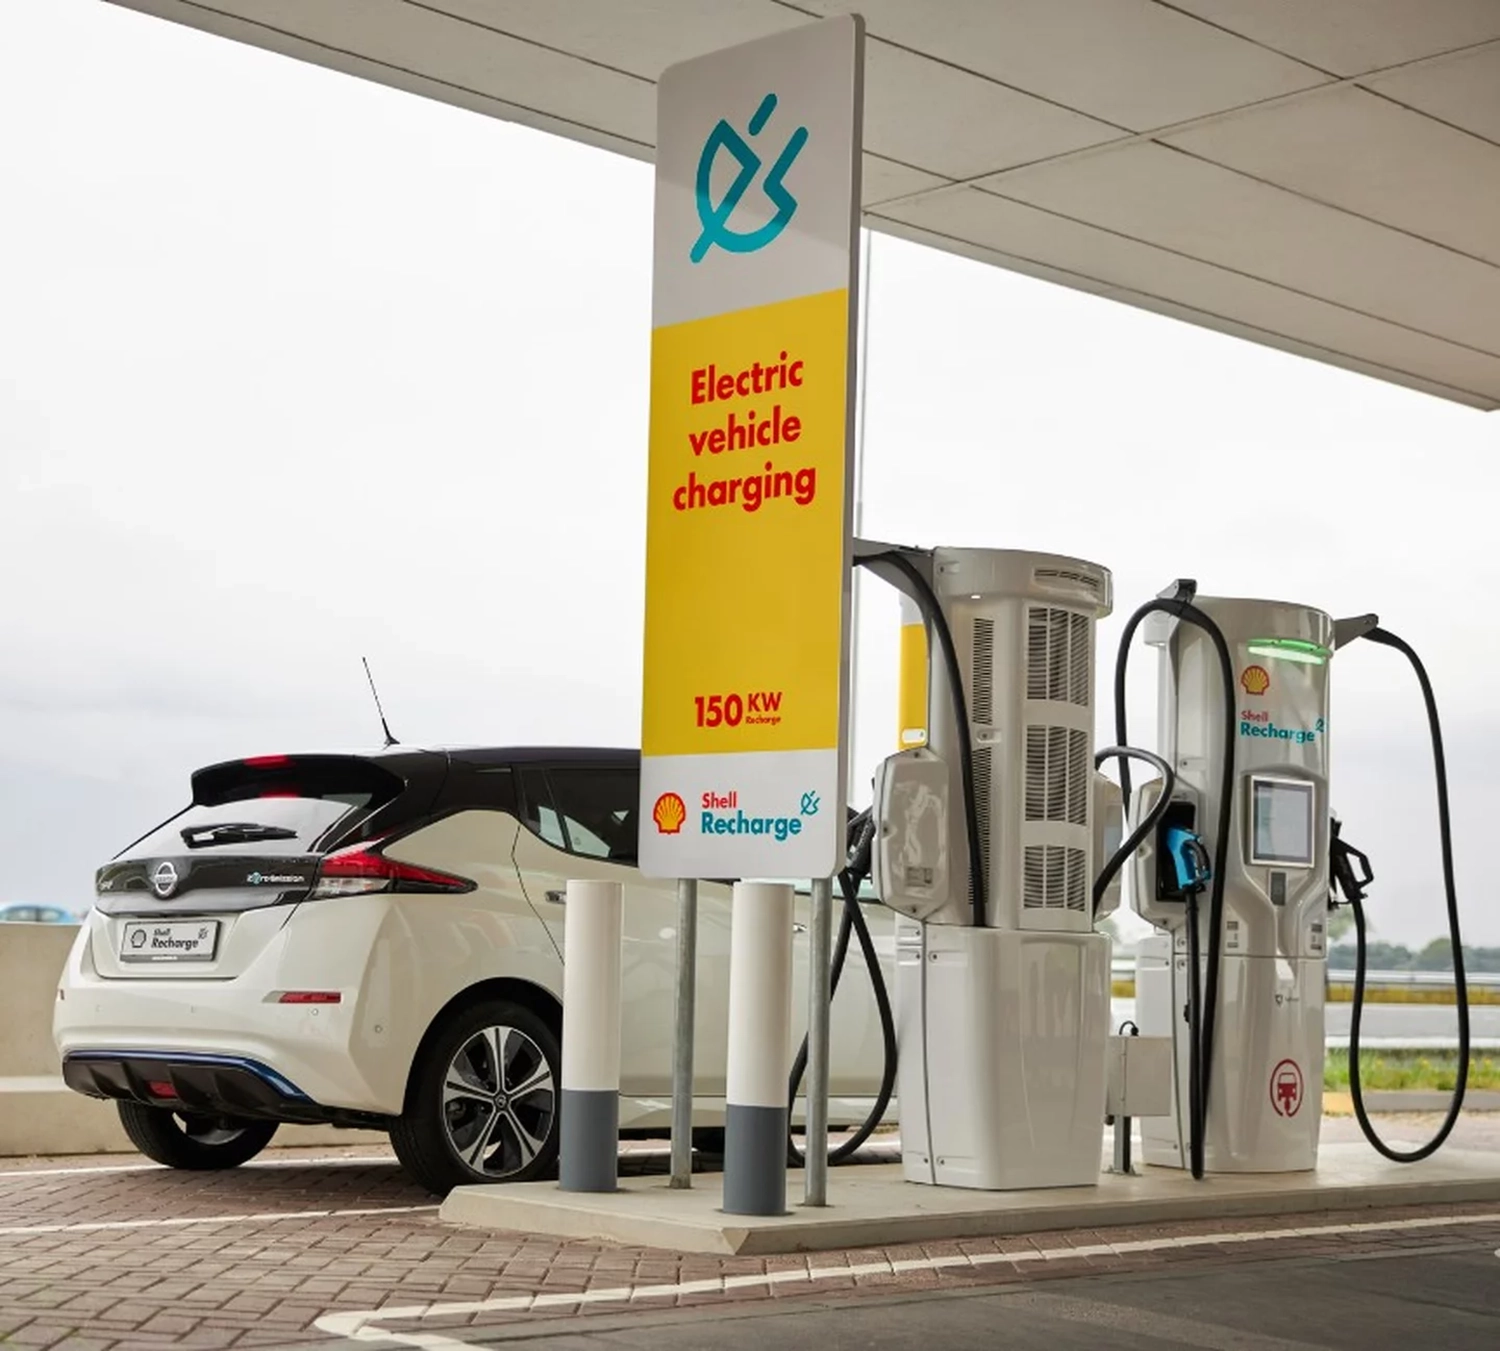 Shell Recharge station